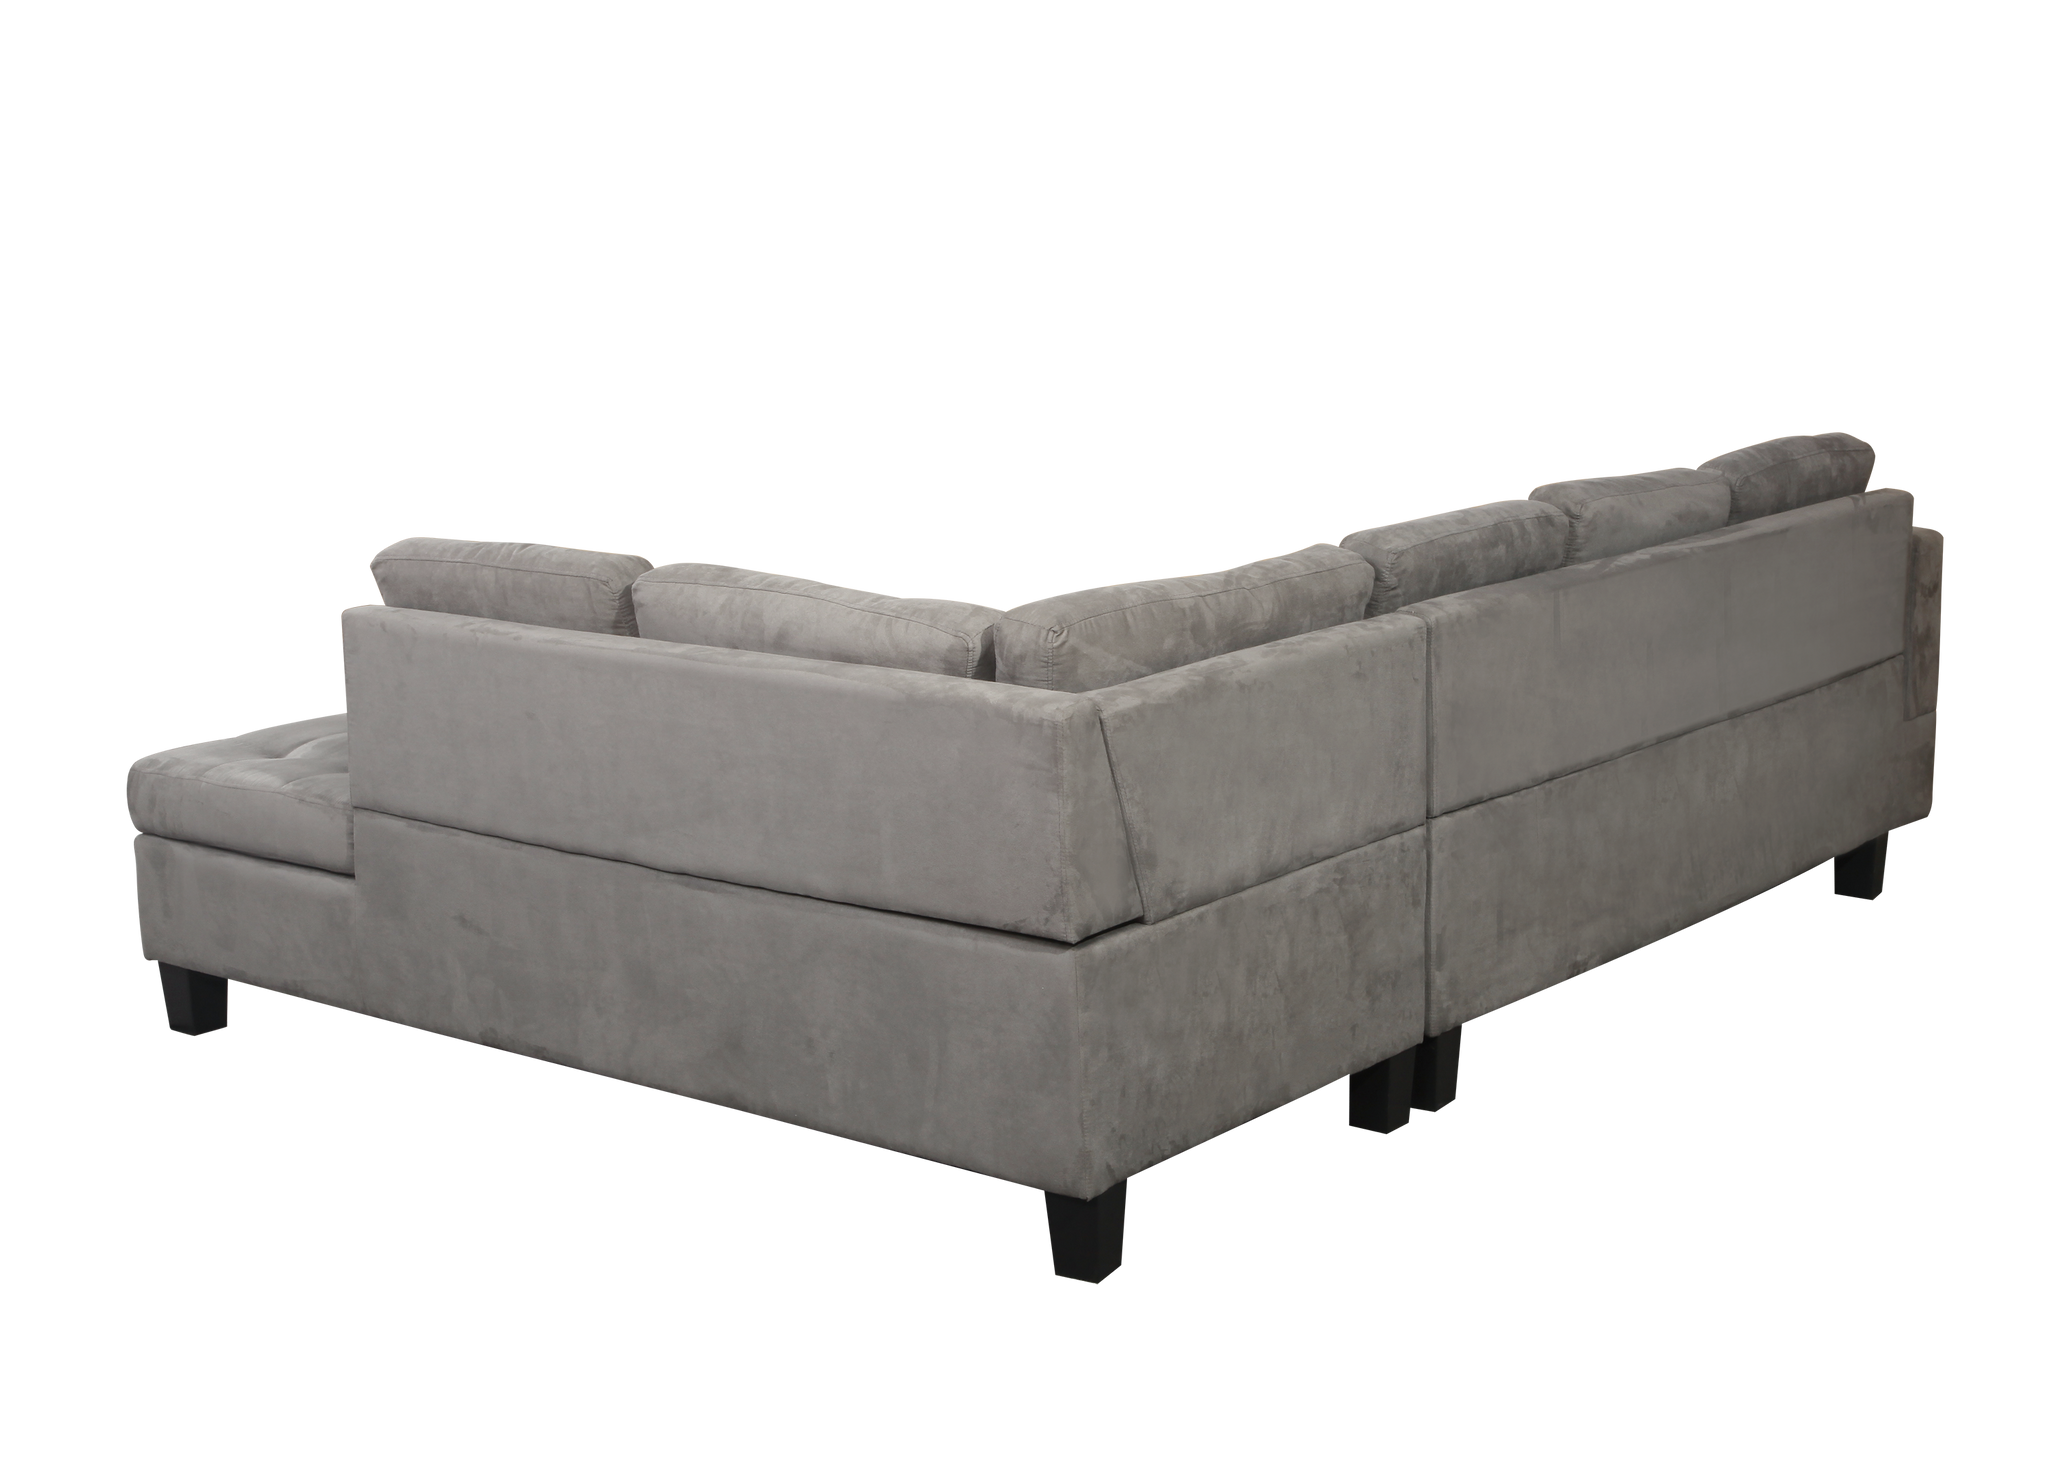 RaDEWAY Sofa Set for Living Room with Chaise Lounge and Storage Ottoman Living Room Furniture